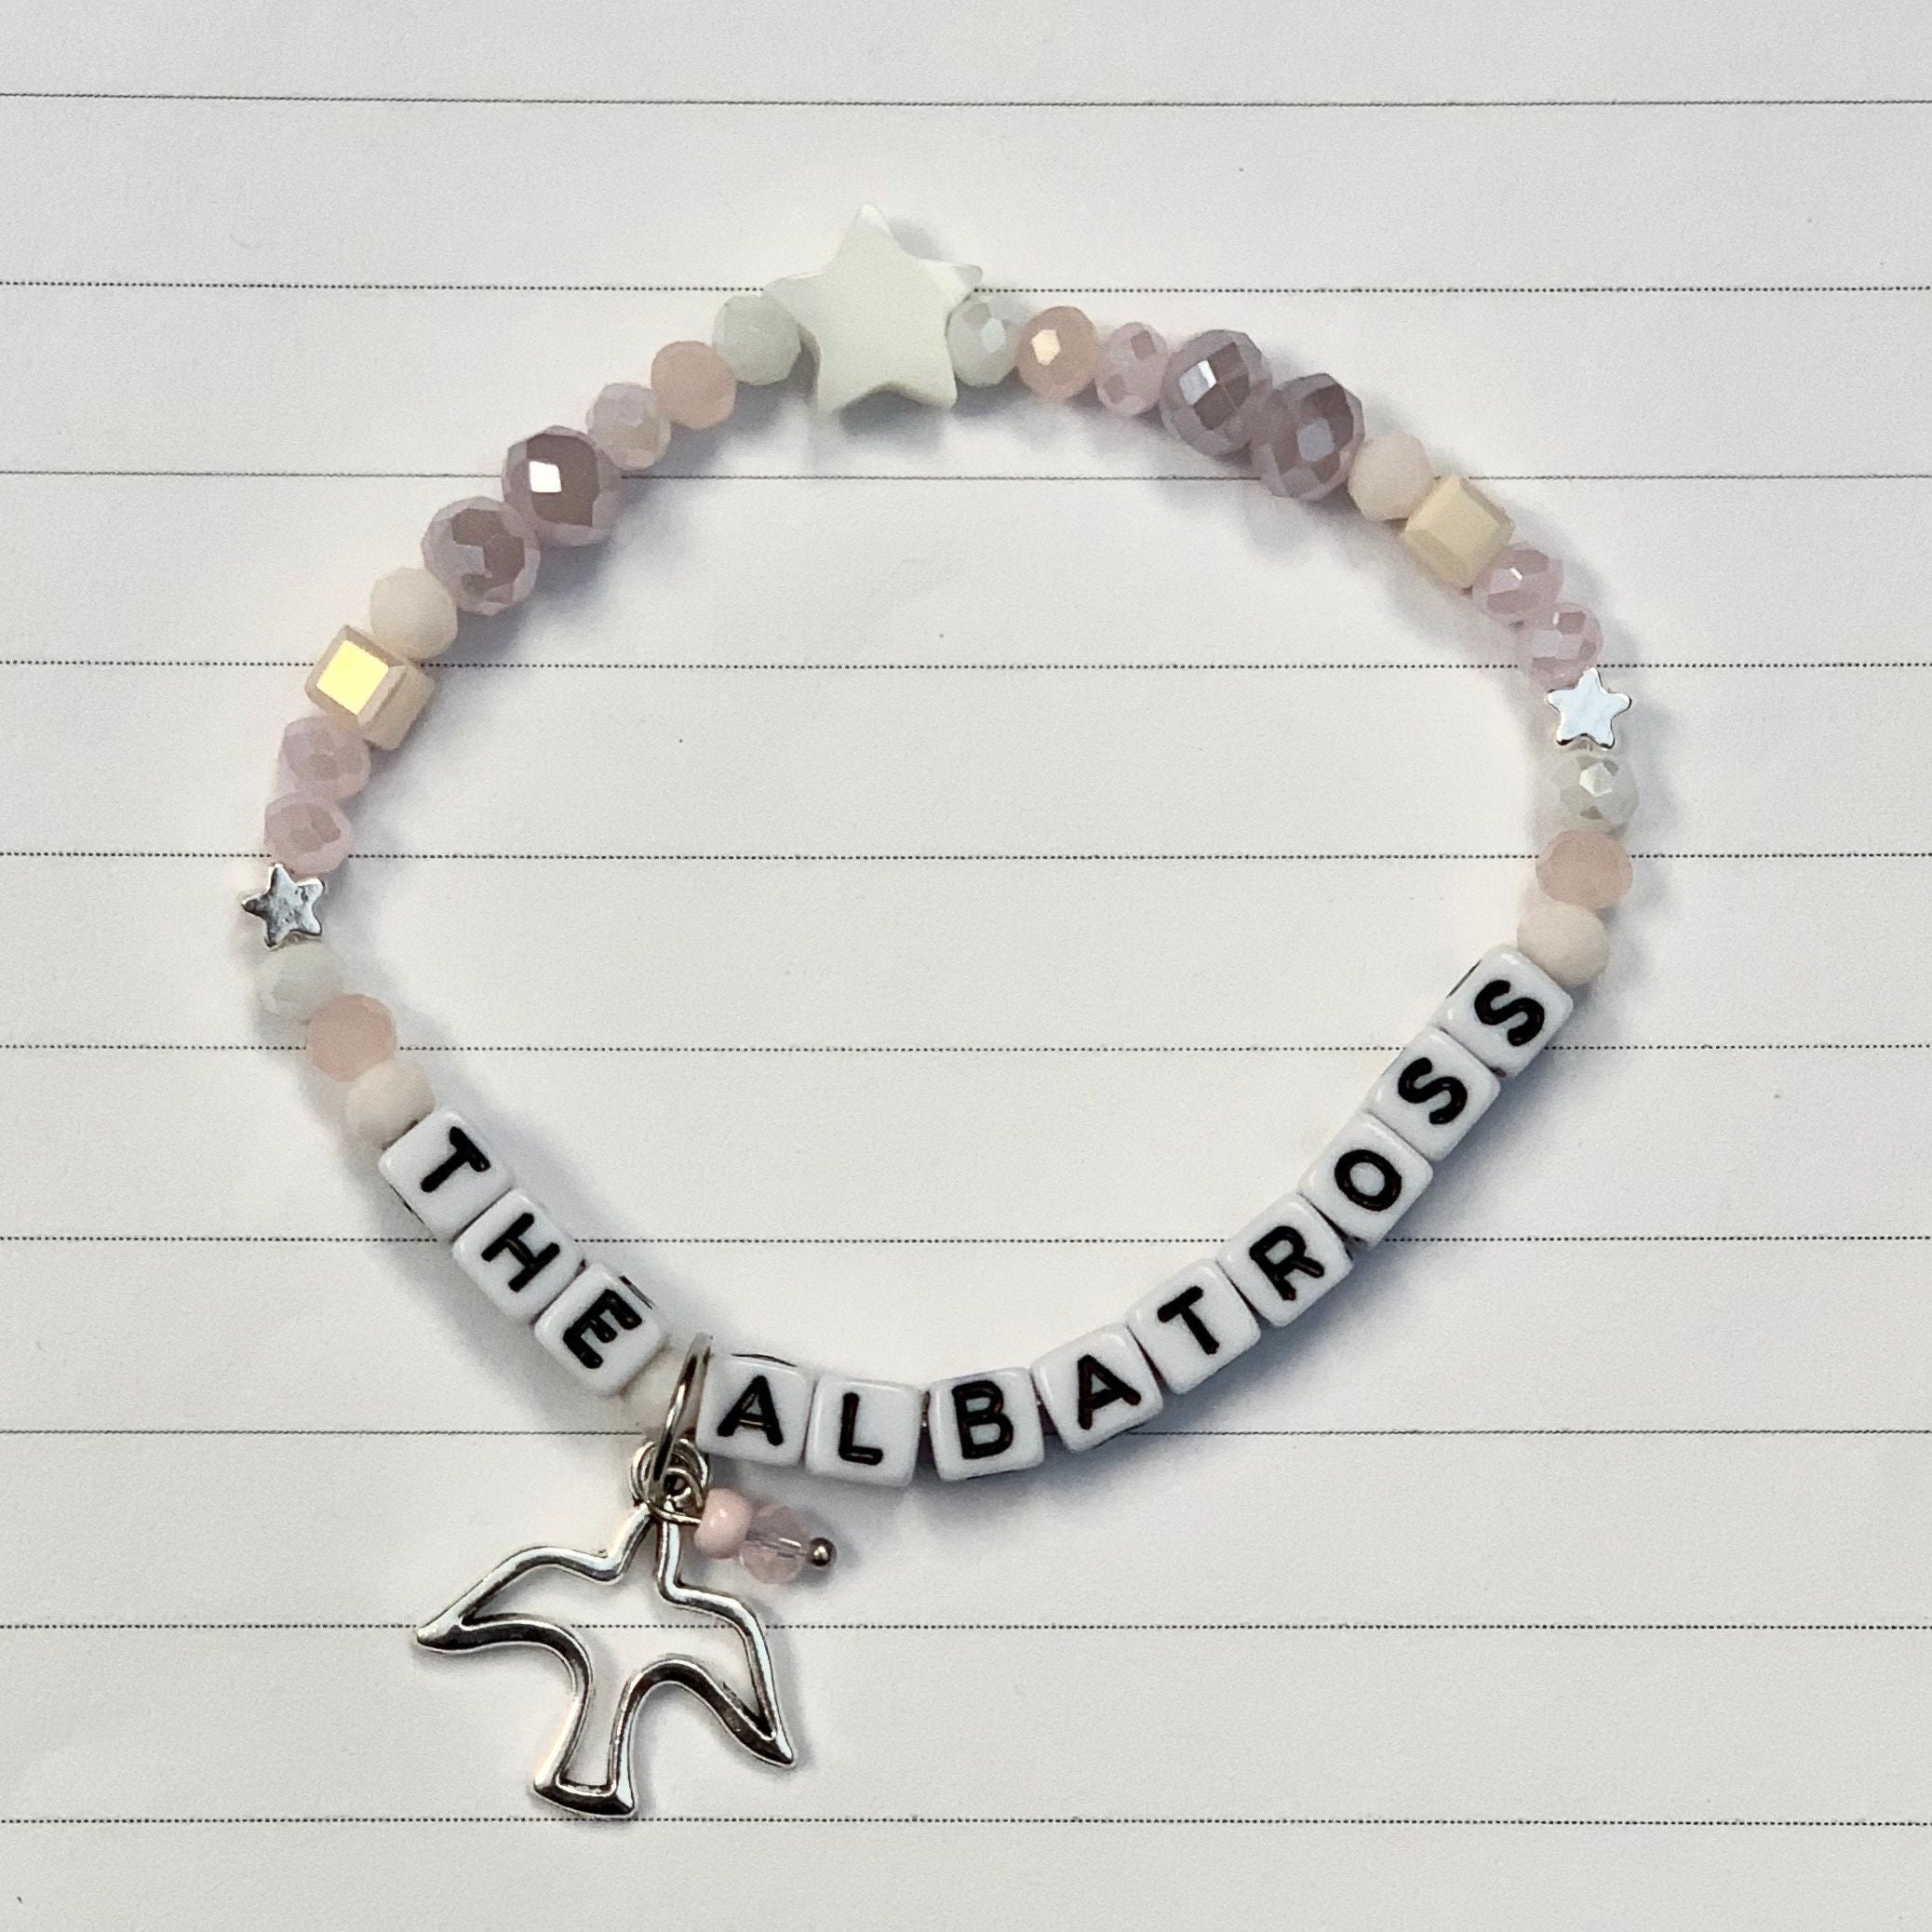 Amazon.com: Stainless Steel Charm Chain Adjustable Size Bracelet A  Wandering Albatross At Sea for Women Girls : Everything Else